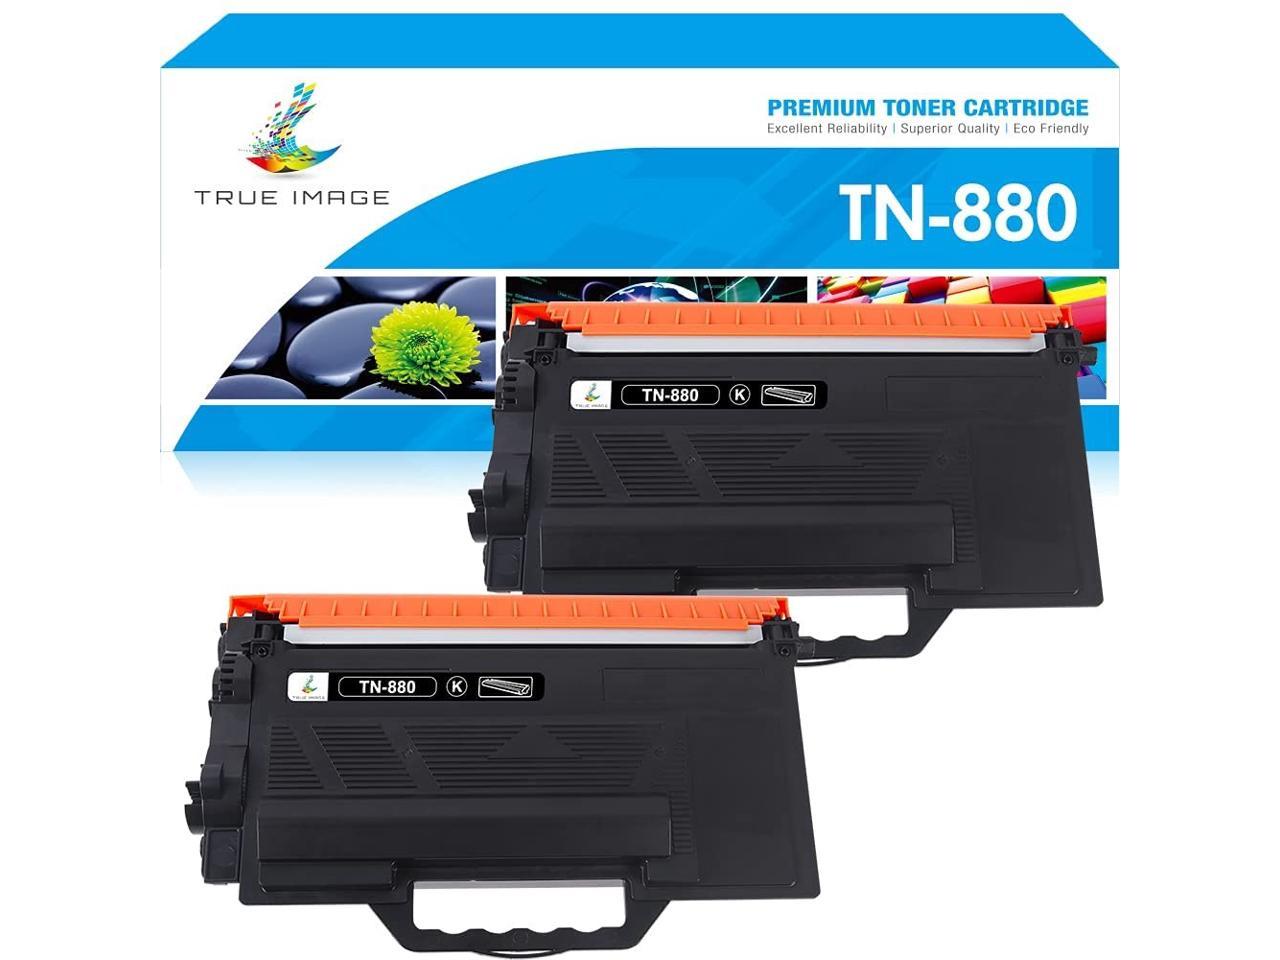 6 Pack Compatible TN880 Super High Yield Toner Cartridge for Brother HL-L6200DW 